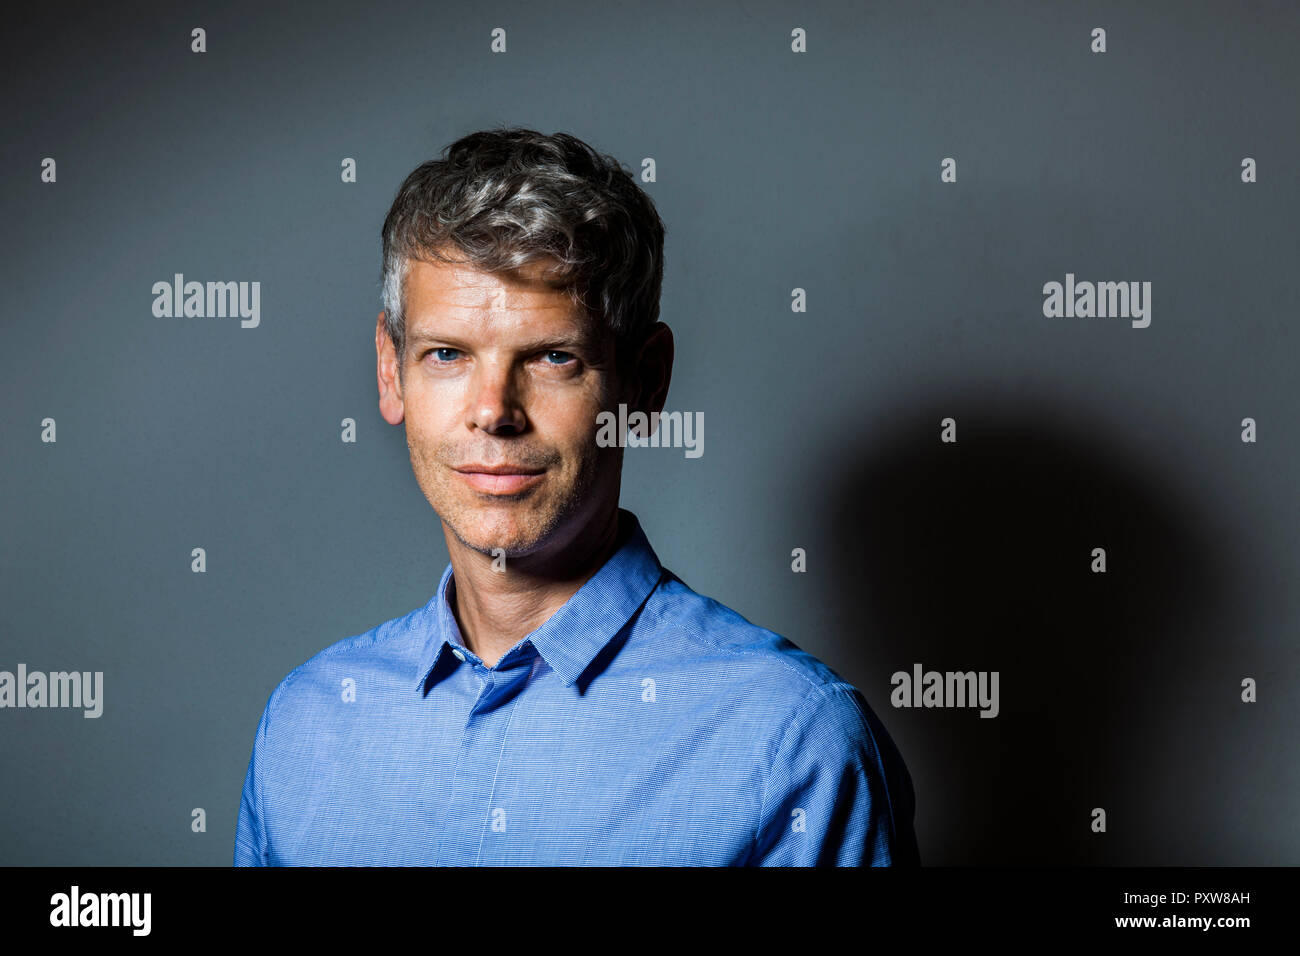 Portrait of mature man with grey hair wearing blue shirt Stock Photo